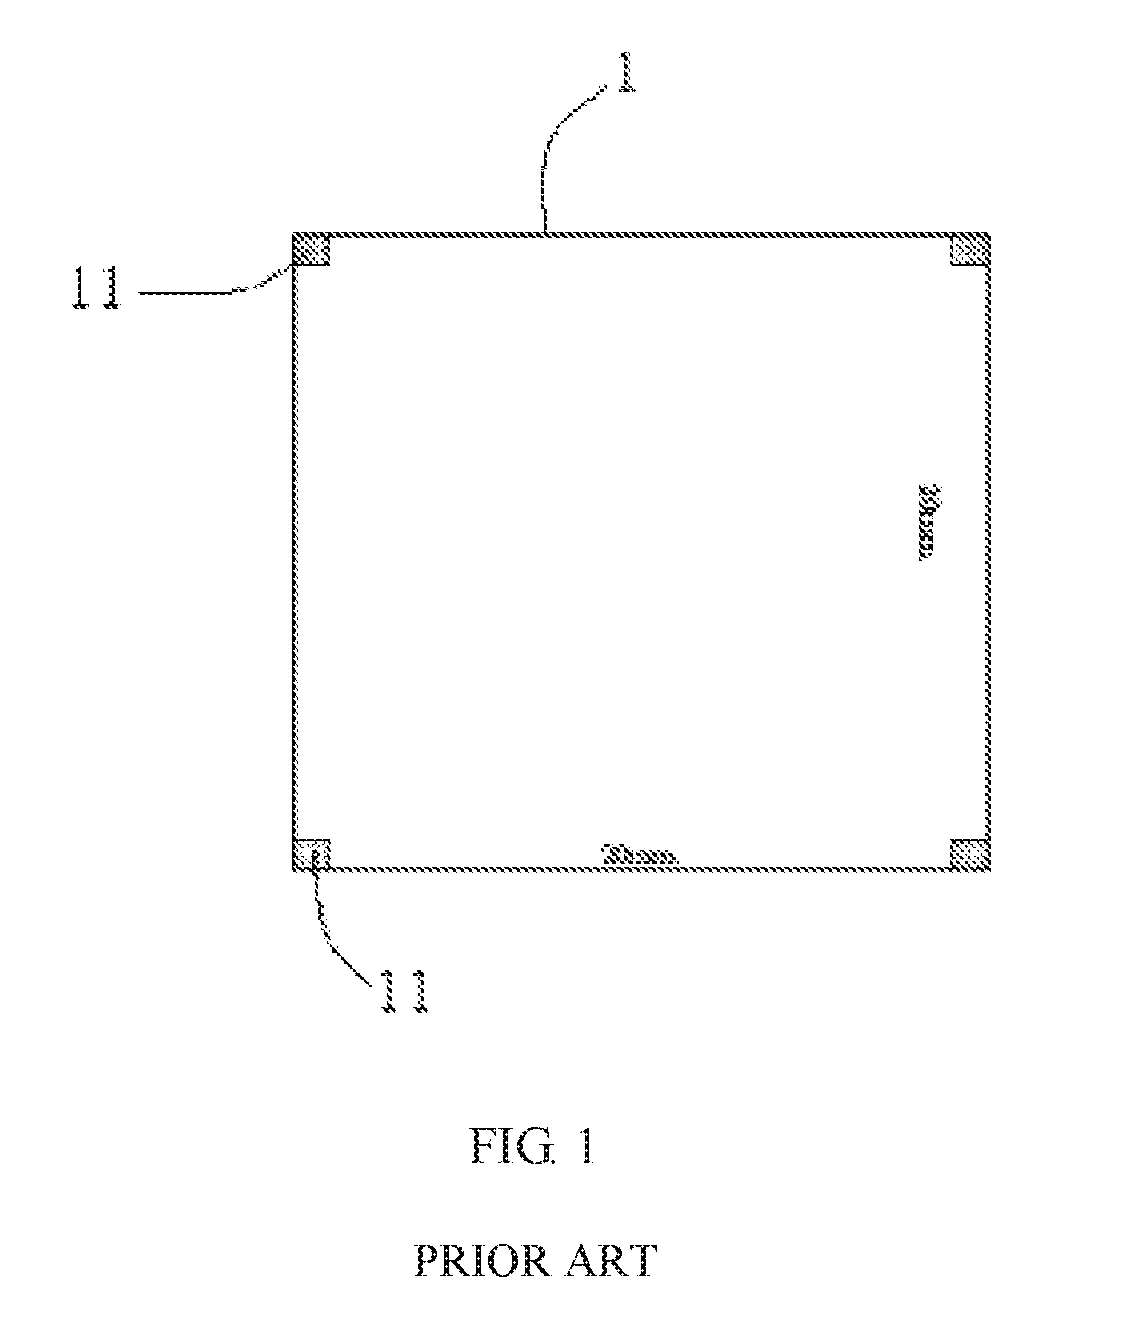 Lithography stepper alignment and control method